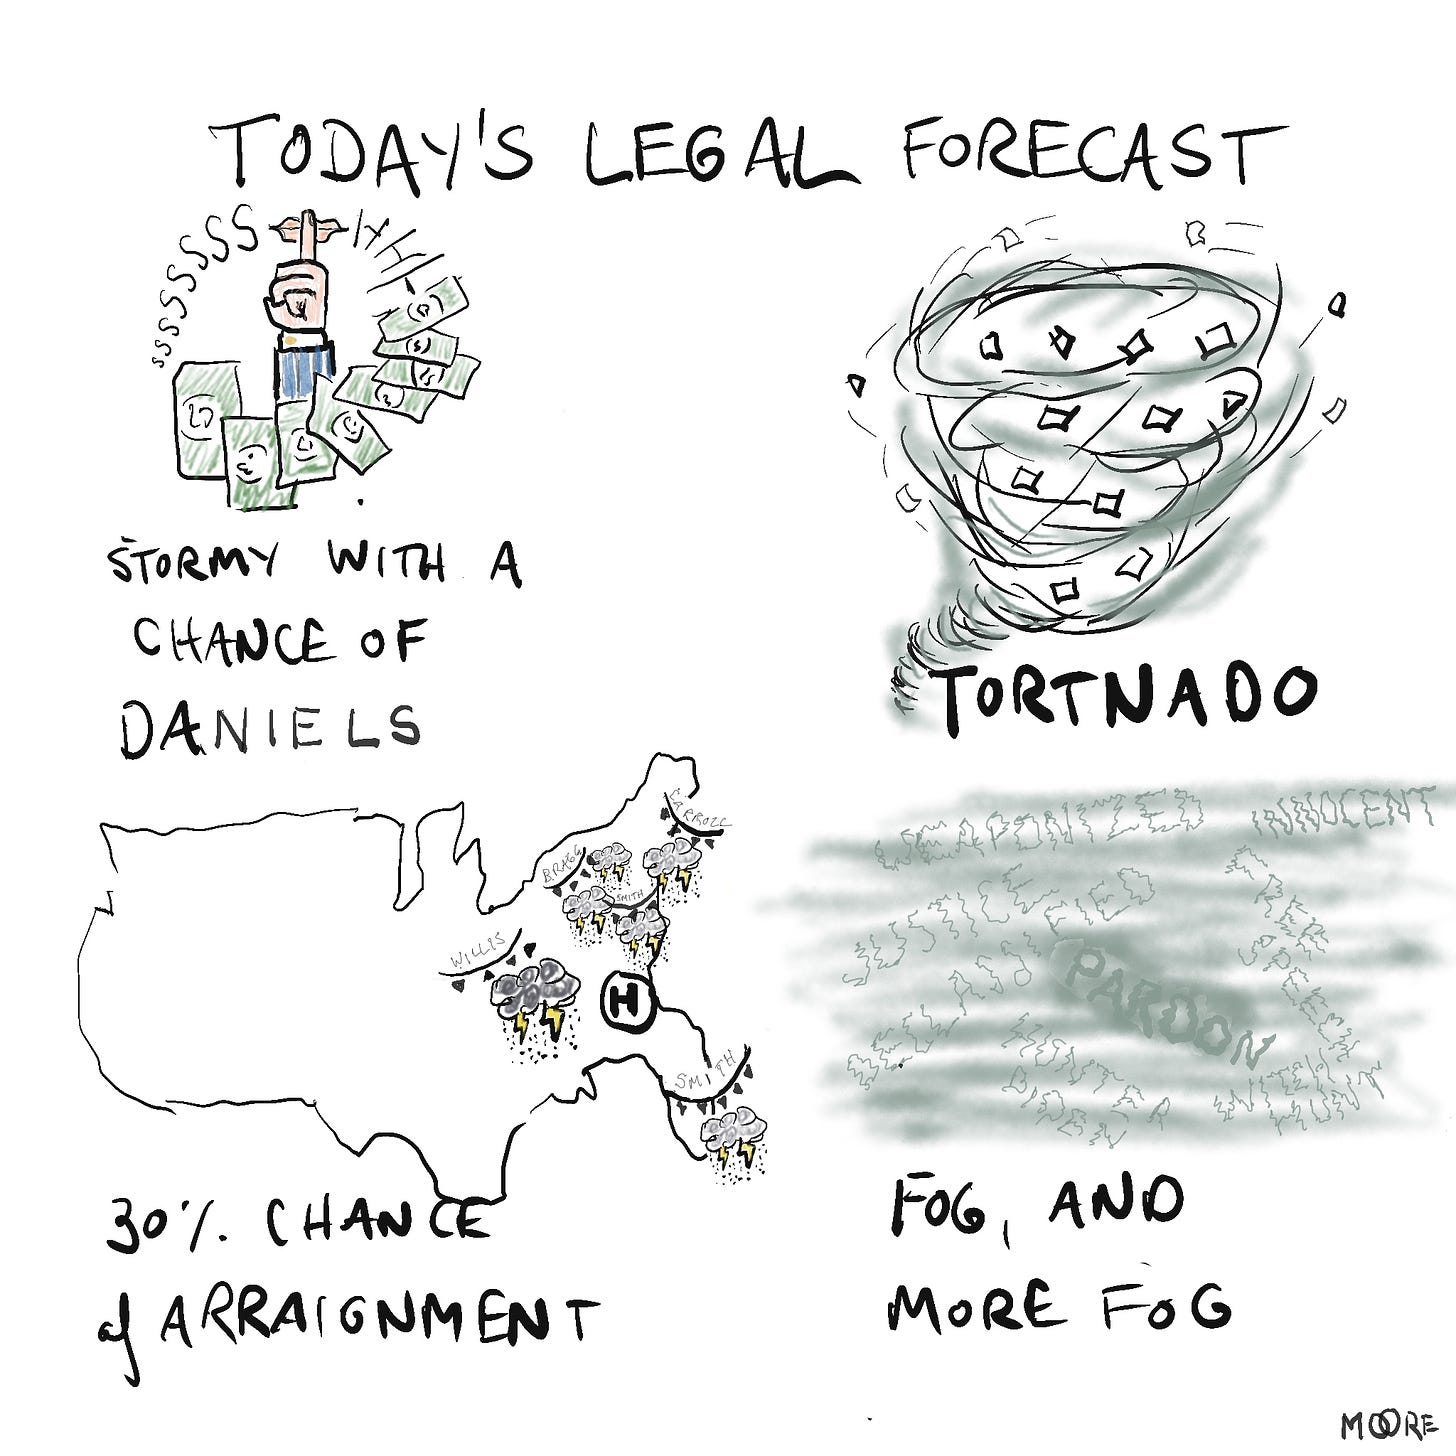 Today's legal forecast